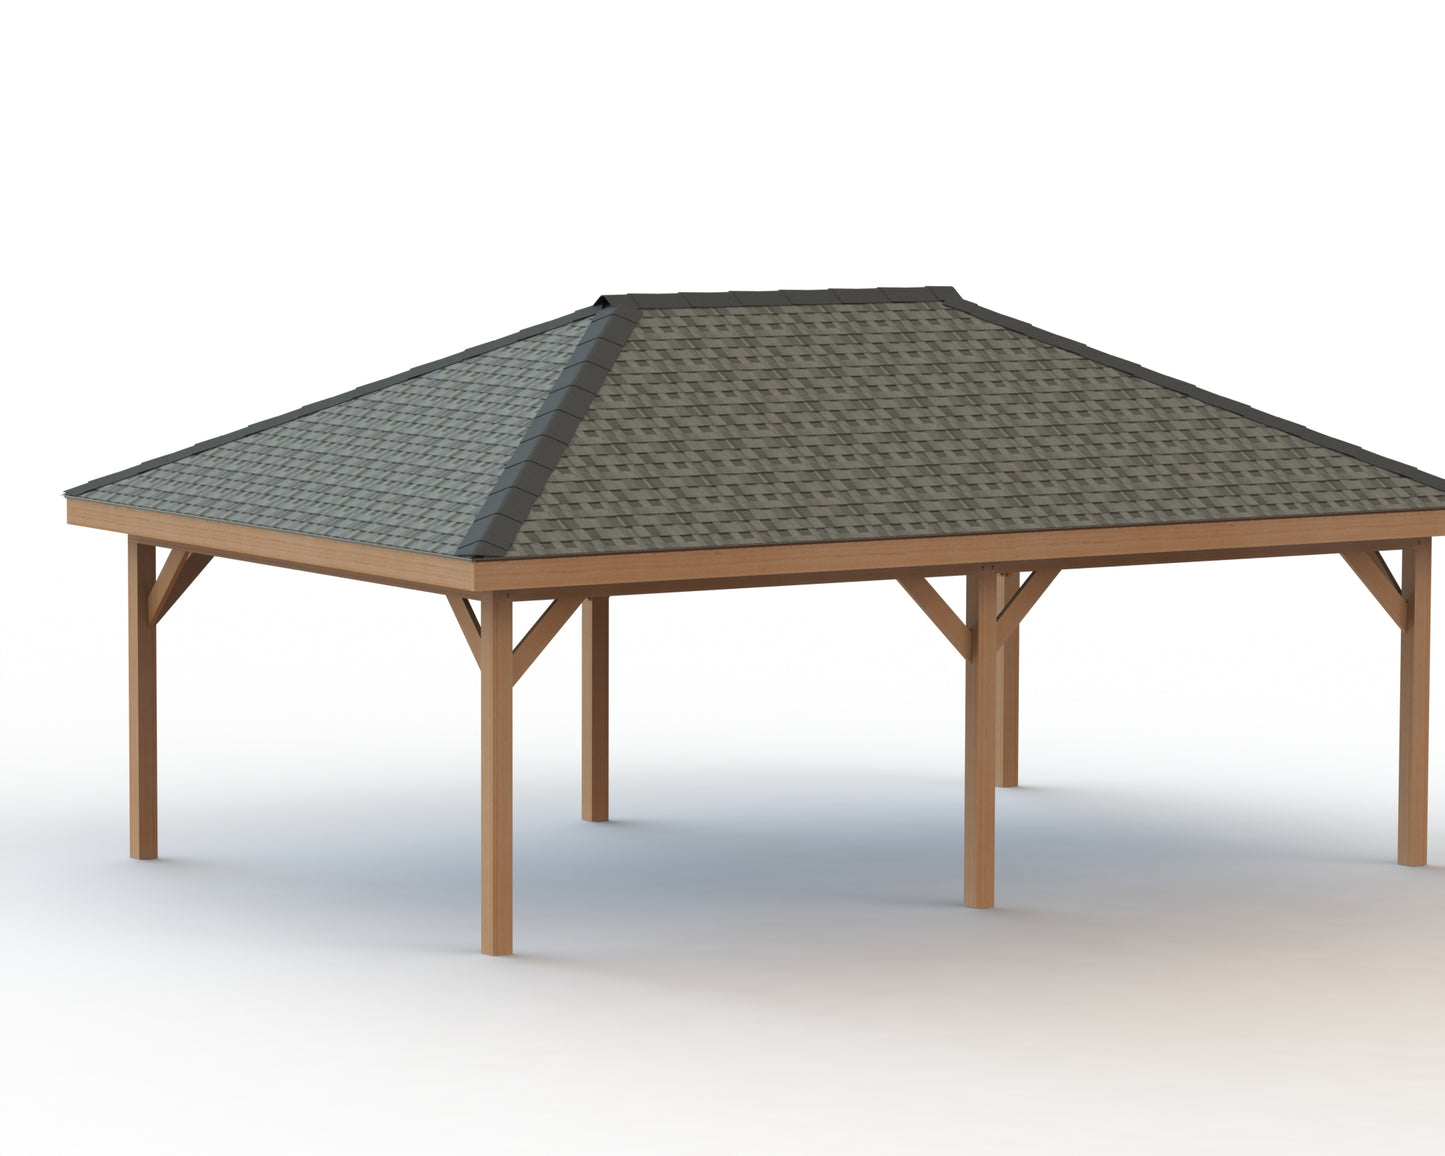 Hip Roof Gazebo Building Plans-Perfect for Hot Tubs - 12' x 30'